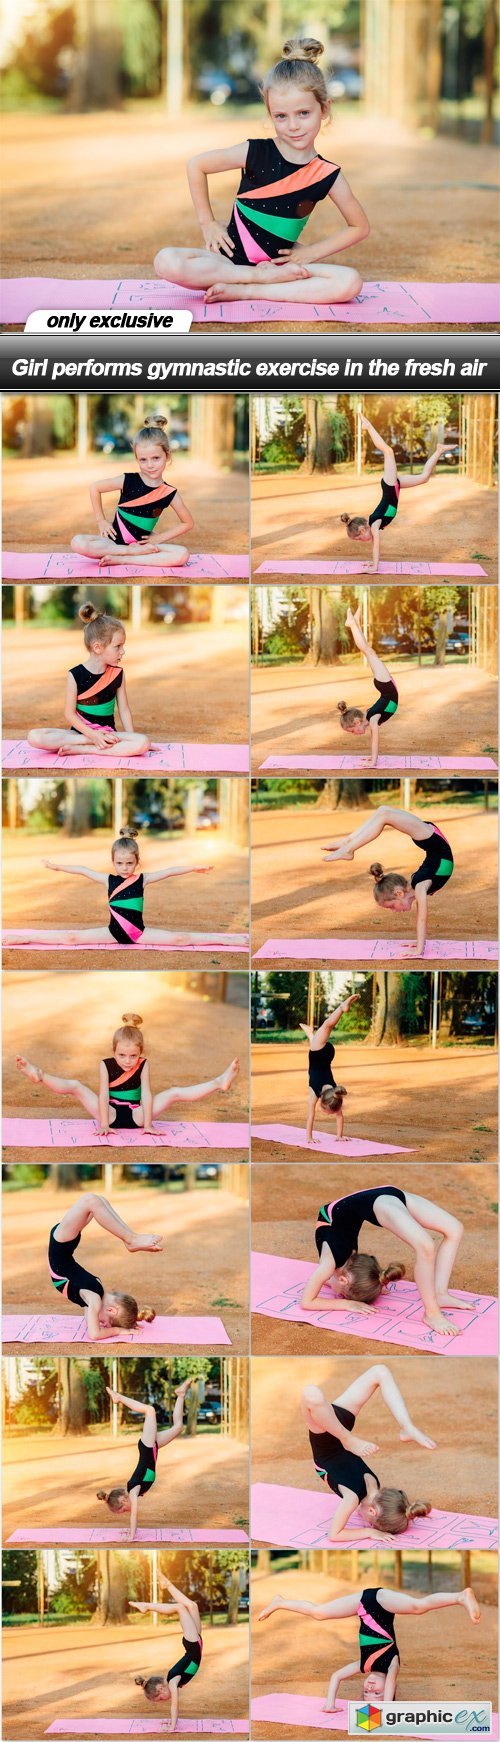 Girl performs gymnastic exercise in the fresh air - 14 UHQ JPEG